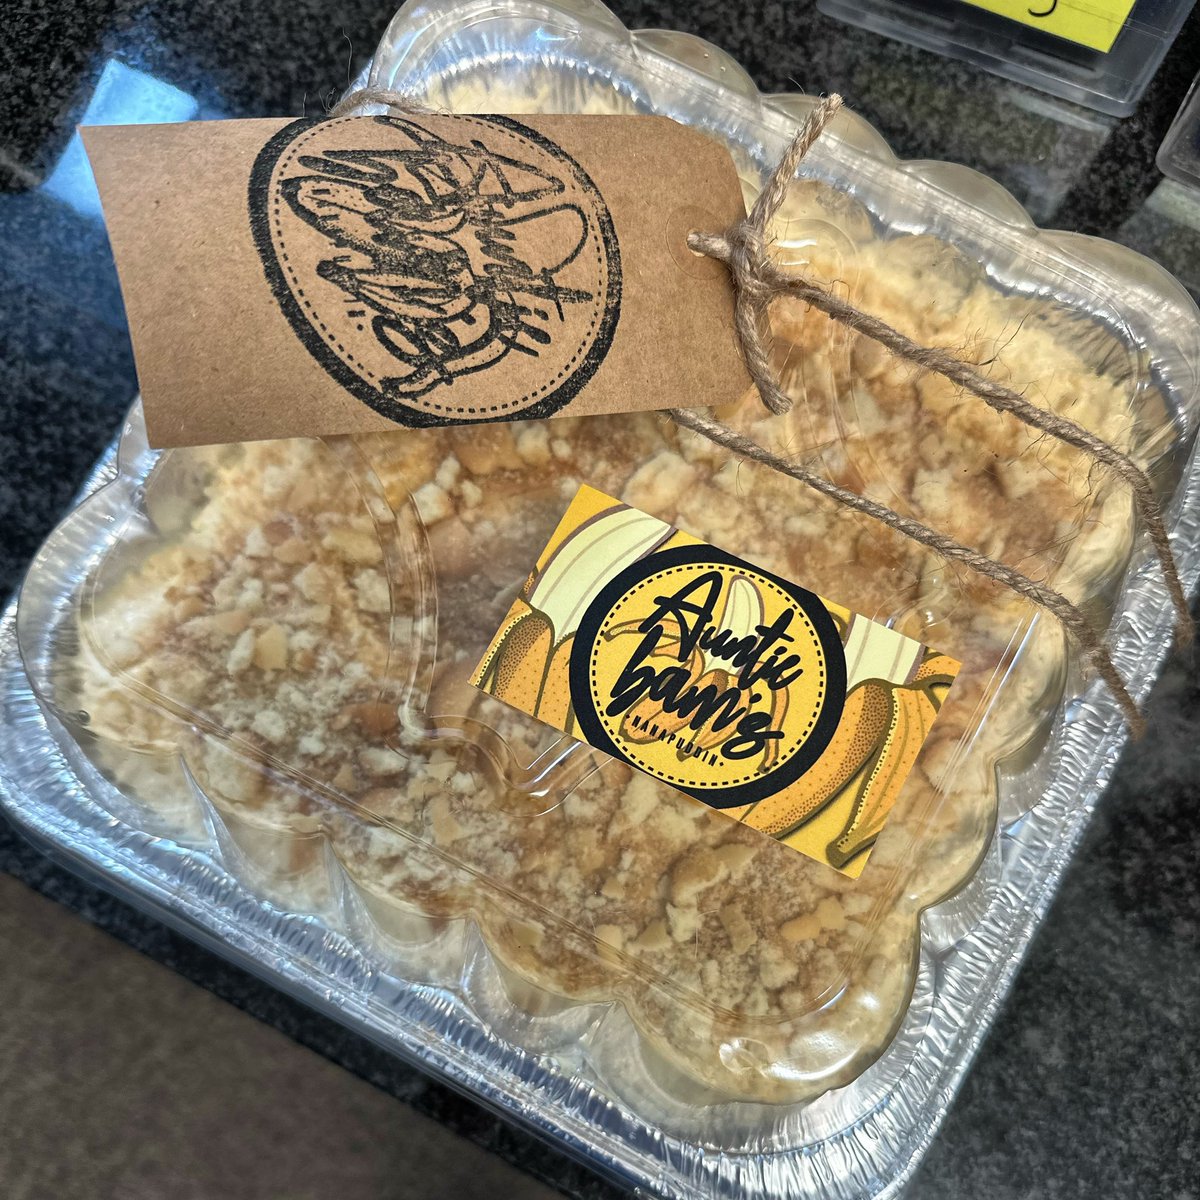 Our customers have the sweetest surprises! 🍌 We received this fantastic banana pudding after providing great service and high-quality repairs! We’re touched and thankful.
 
#greatcustomers #sweettooth #satisfiedcustomers #bananapudding #bestinclass #rolllikenothingeverhappened